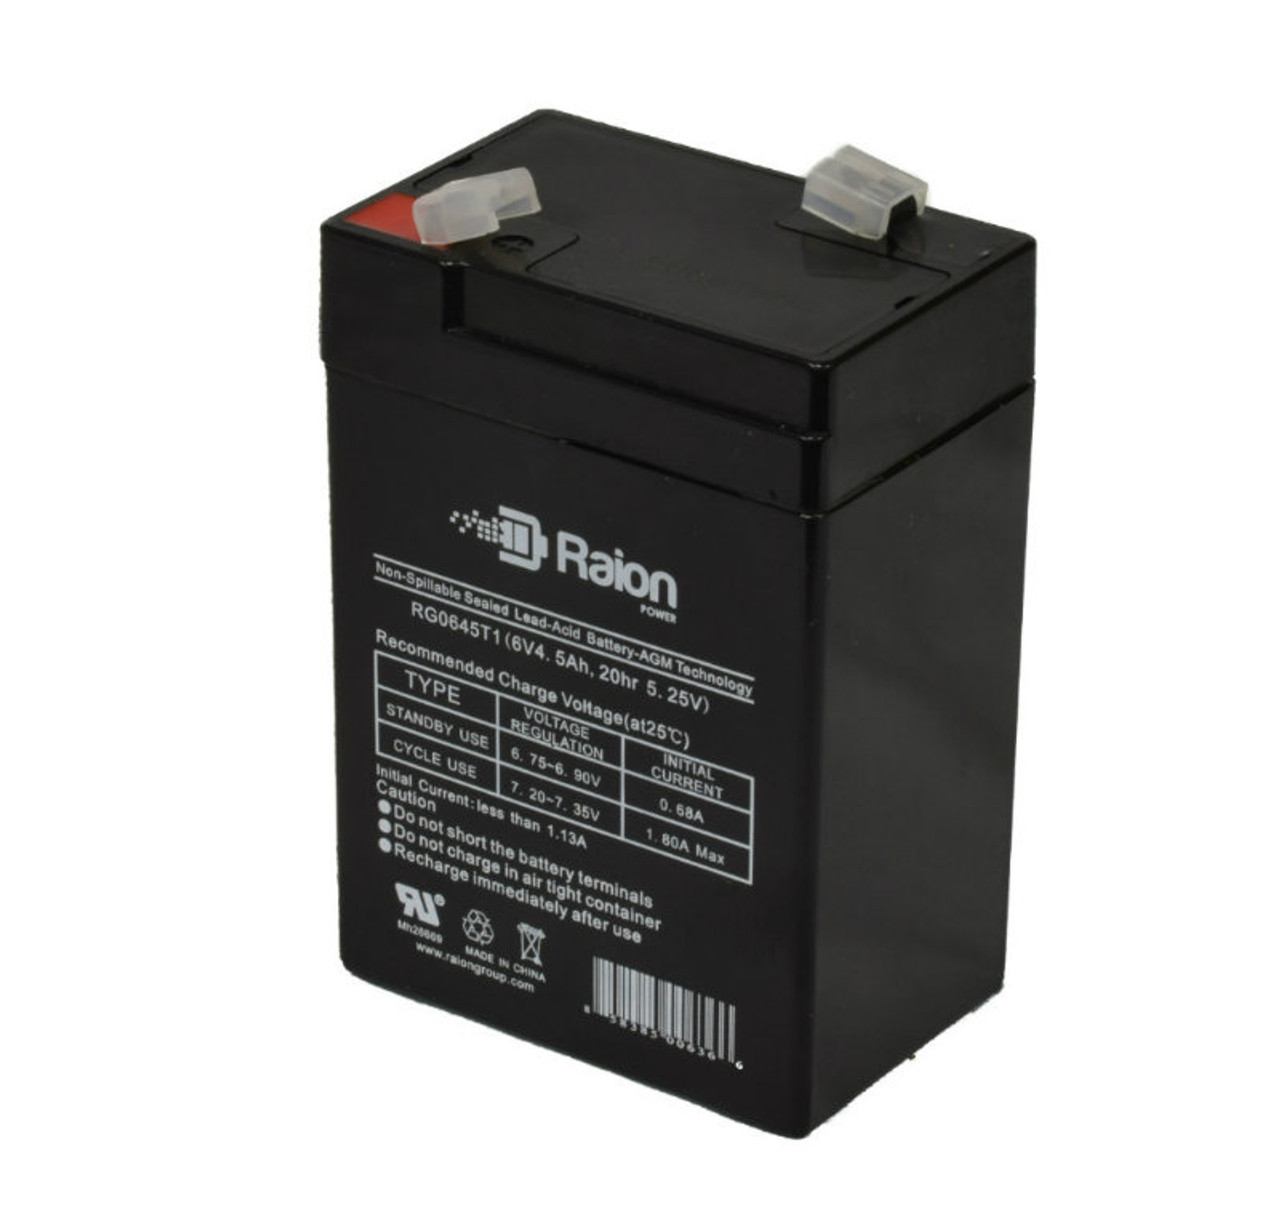 Raion Power RG0645T1 6V 4.5Ah Replacement Battery Cartridge for Motoma MS6V5